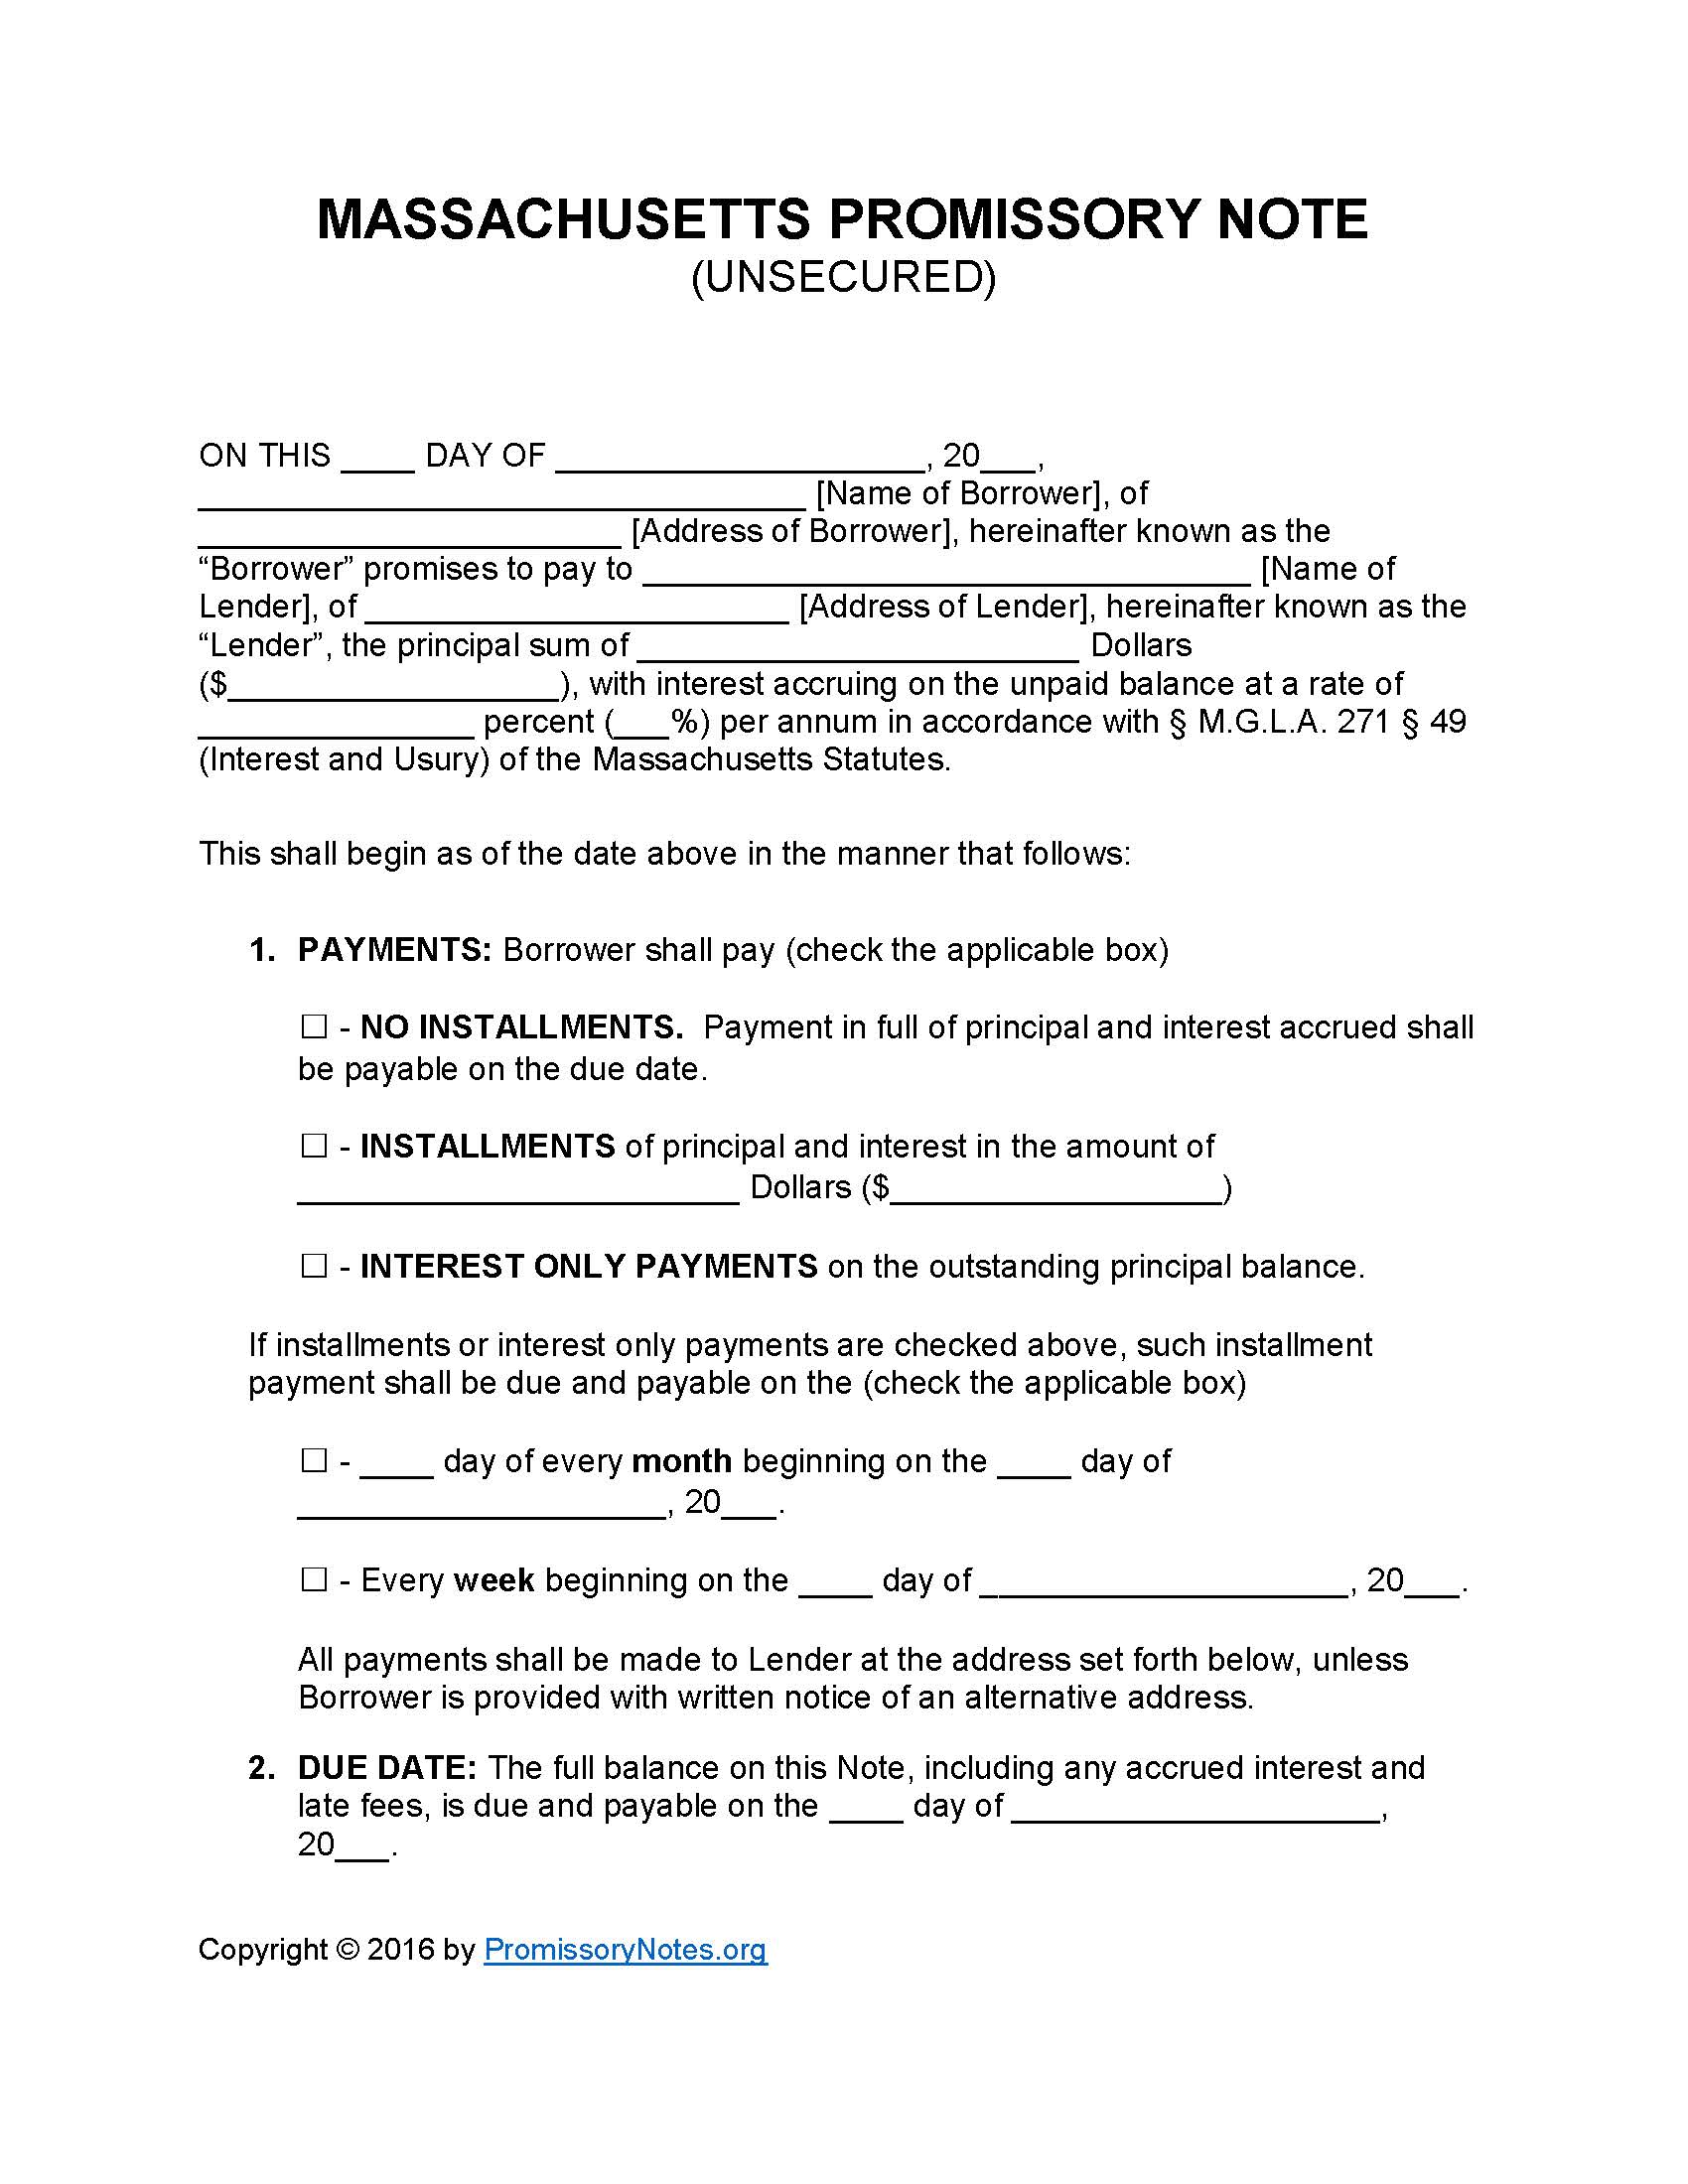 Massachusetts Unsecured Promissory Note Template Promissory Notes